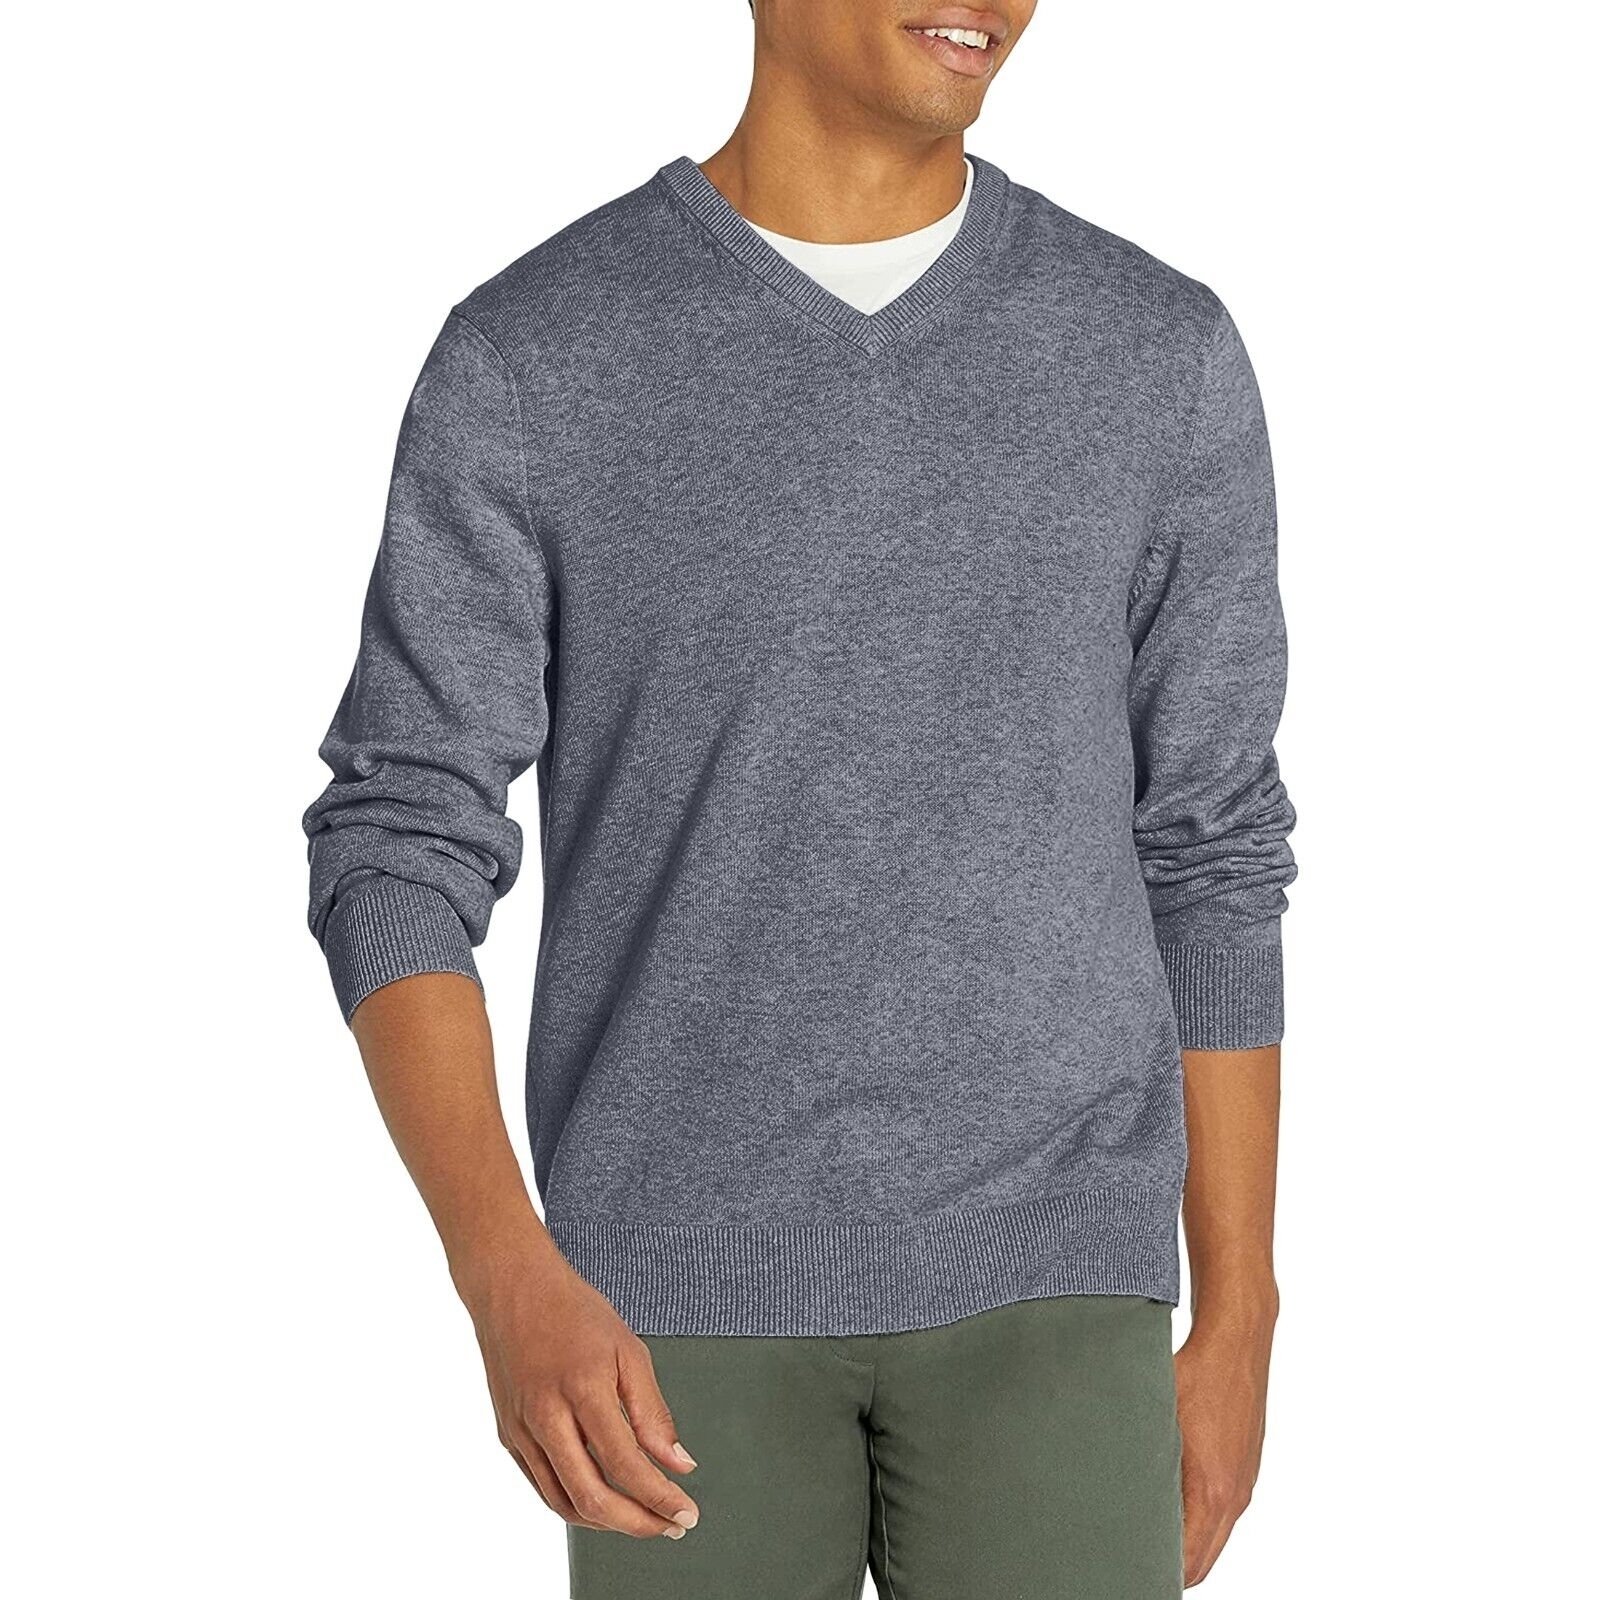 Men's Casual Ultra-Soft Slim Fit Warm Knit Pullover V-Neck Sweater For Winter - Blue, XX-Large